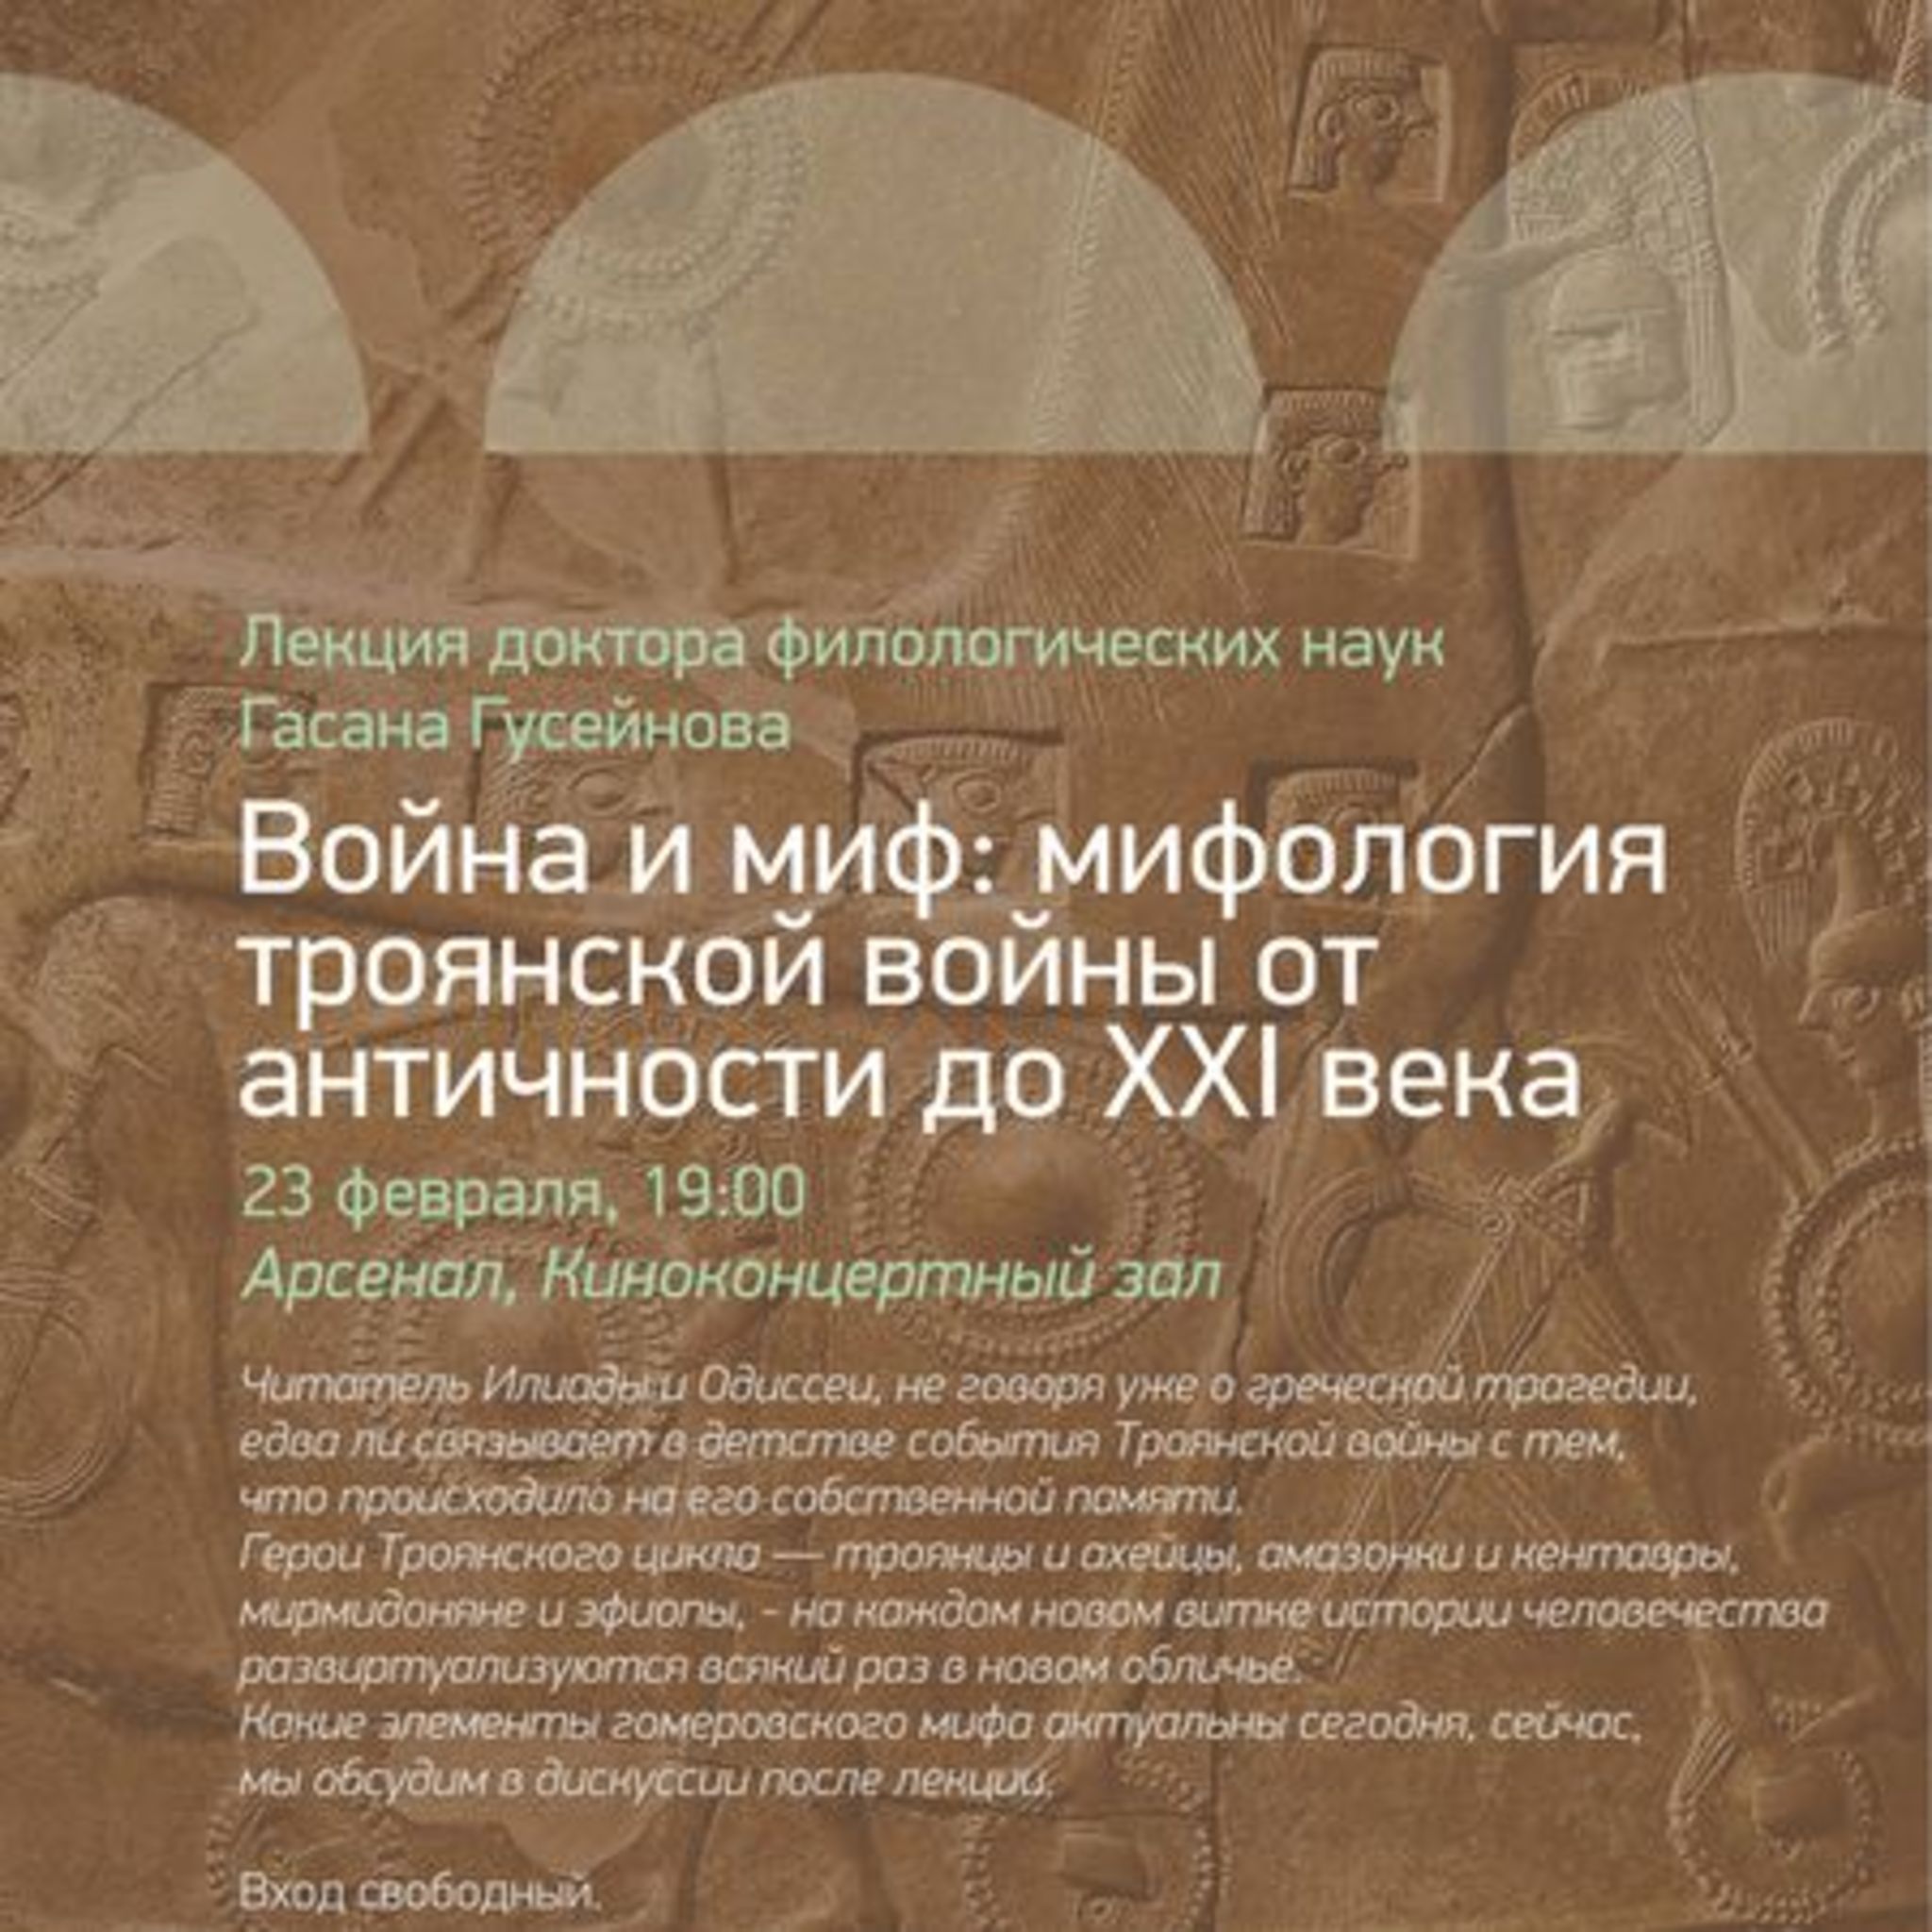 Lecture by Professor Hasan Huseynov and war myth mythology of the Trojan War, from antiquity to the XXI century